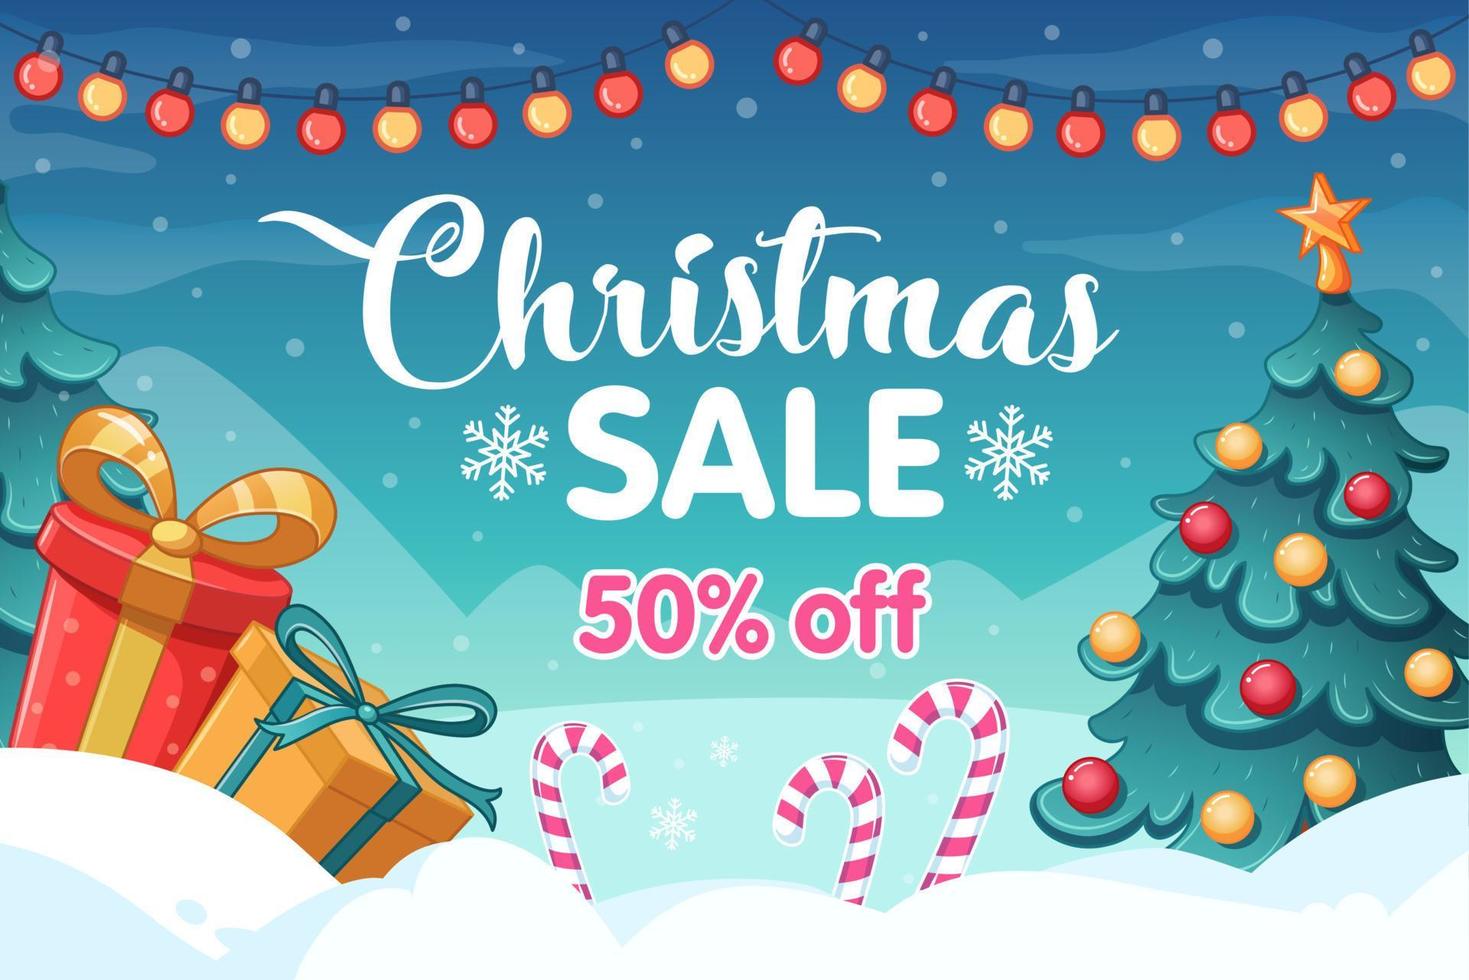 Christmas sale, advertising banner. Gift boxes, christmas tree and candy canes. Vector illustration. Winter background with snowfall and Christmas lights.